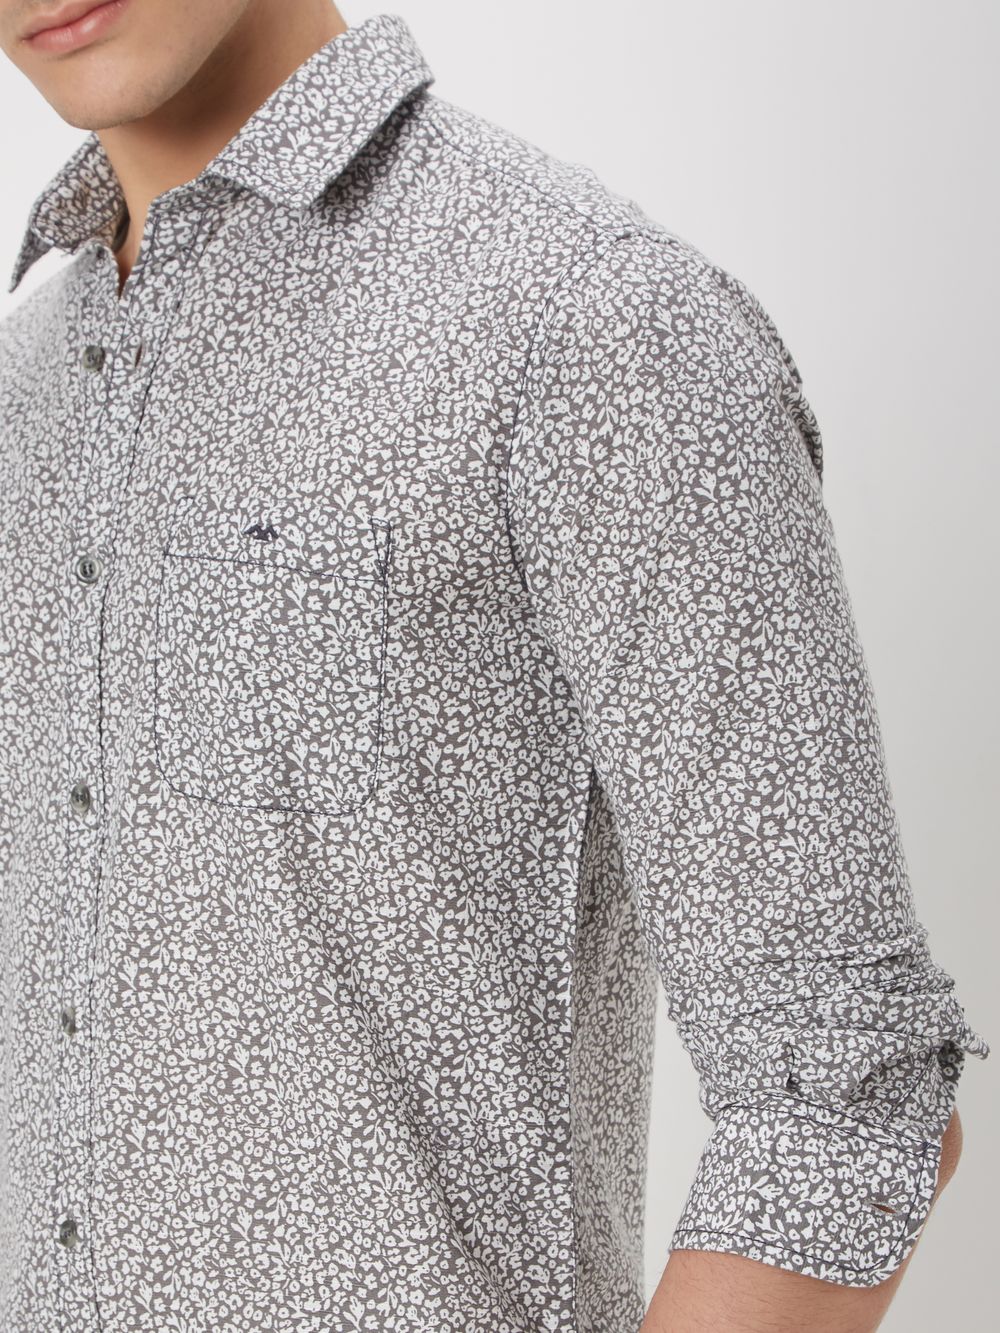 Grey & White Floral Print Slim Fit Casual Shirt